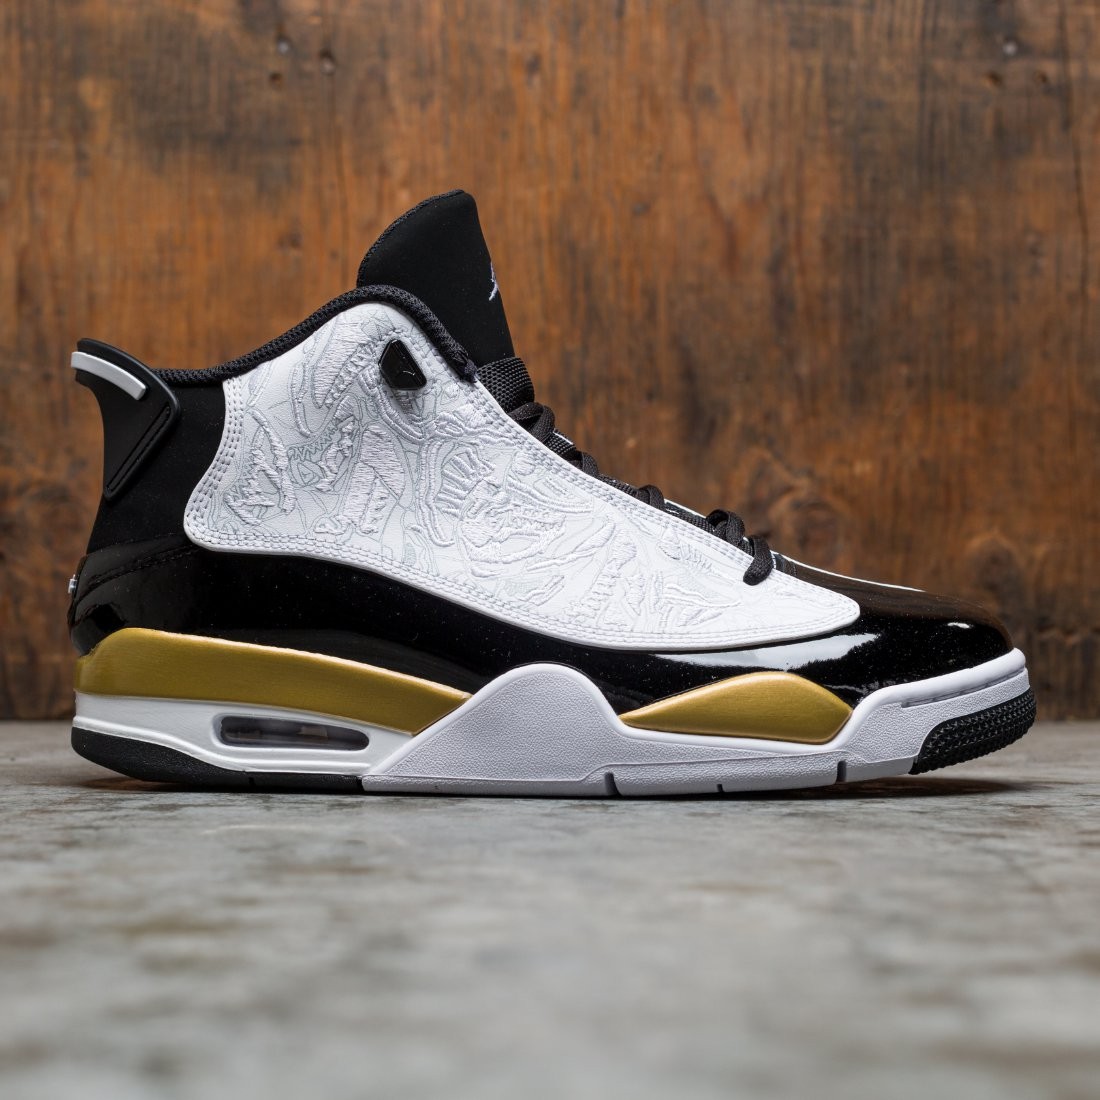 jordans black and white and gold